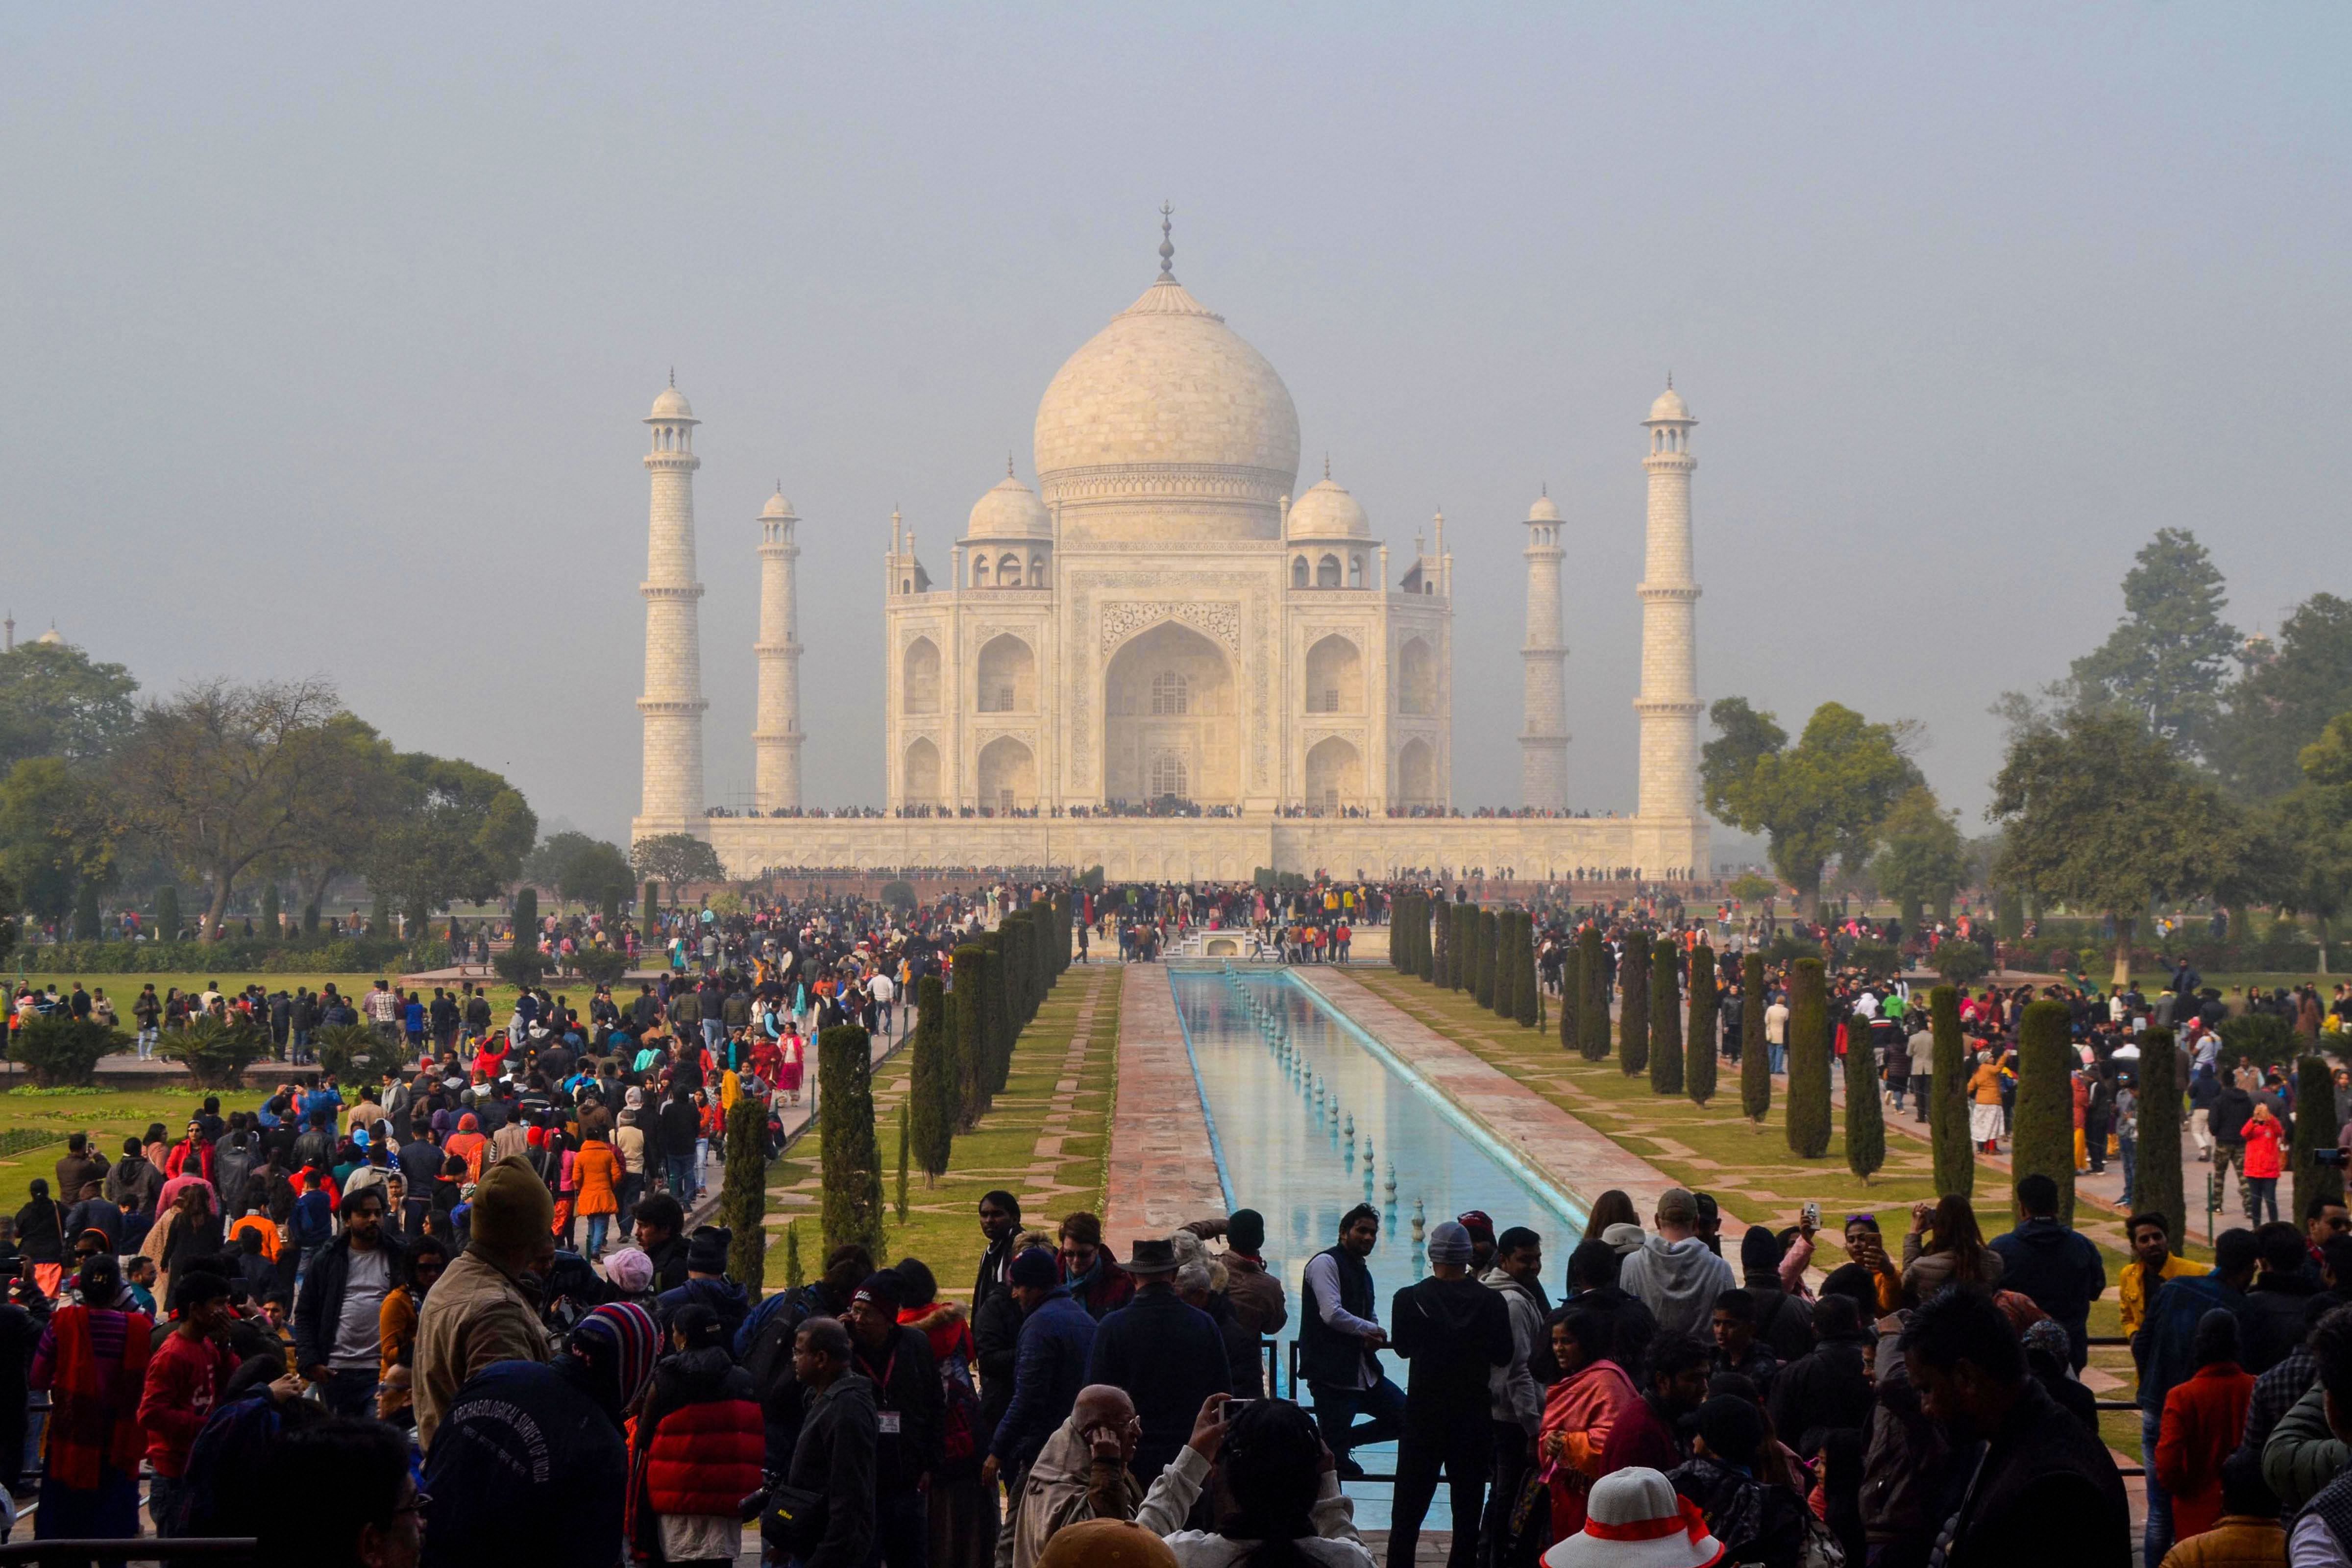  Tourists visit the historic Taj Mahal on a cold and wintry day in Agra. (PTI Photo)